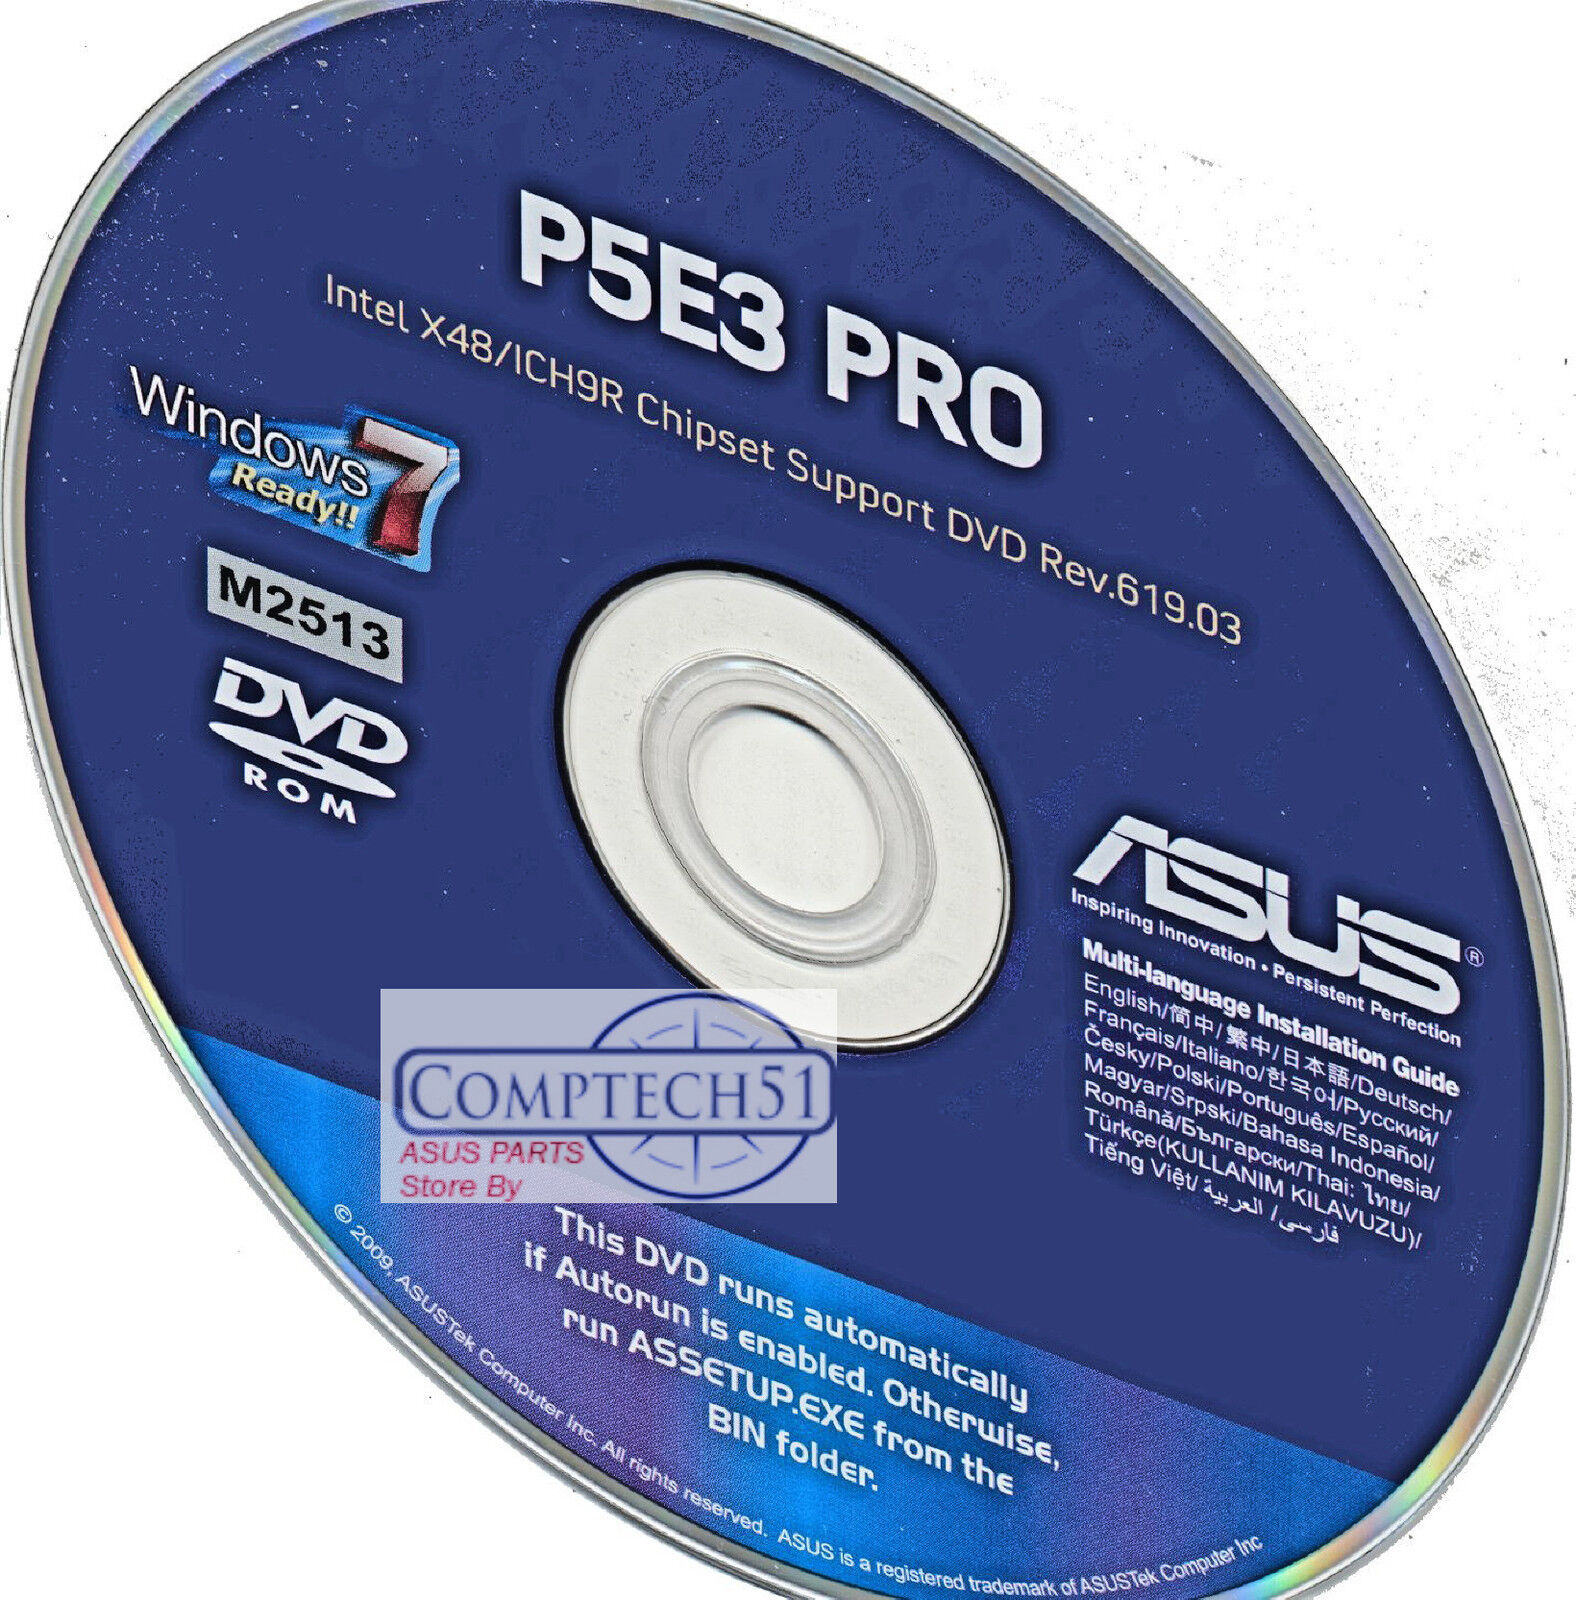 ASUS P5E3 PRO MOTHERBOARD AUTO INSTALL DRIVERS M2513